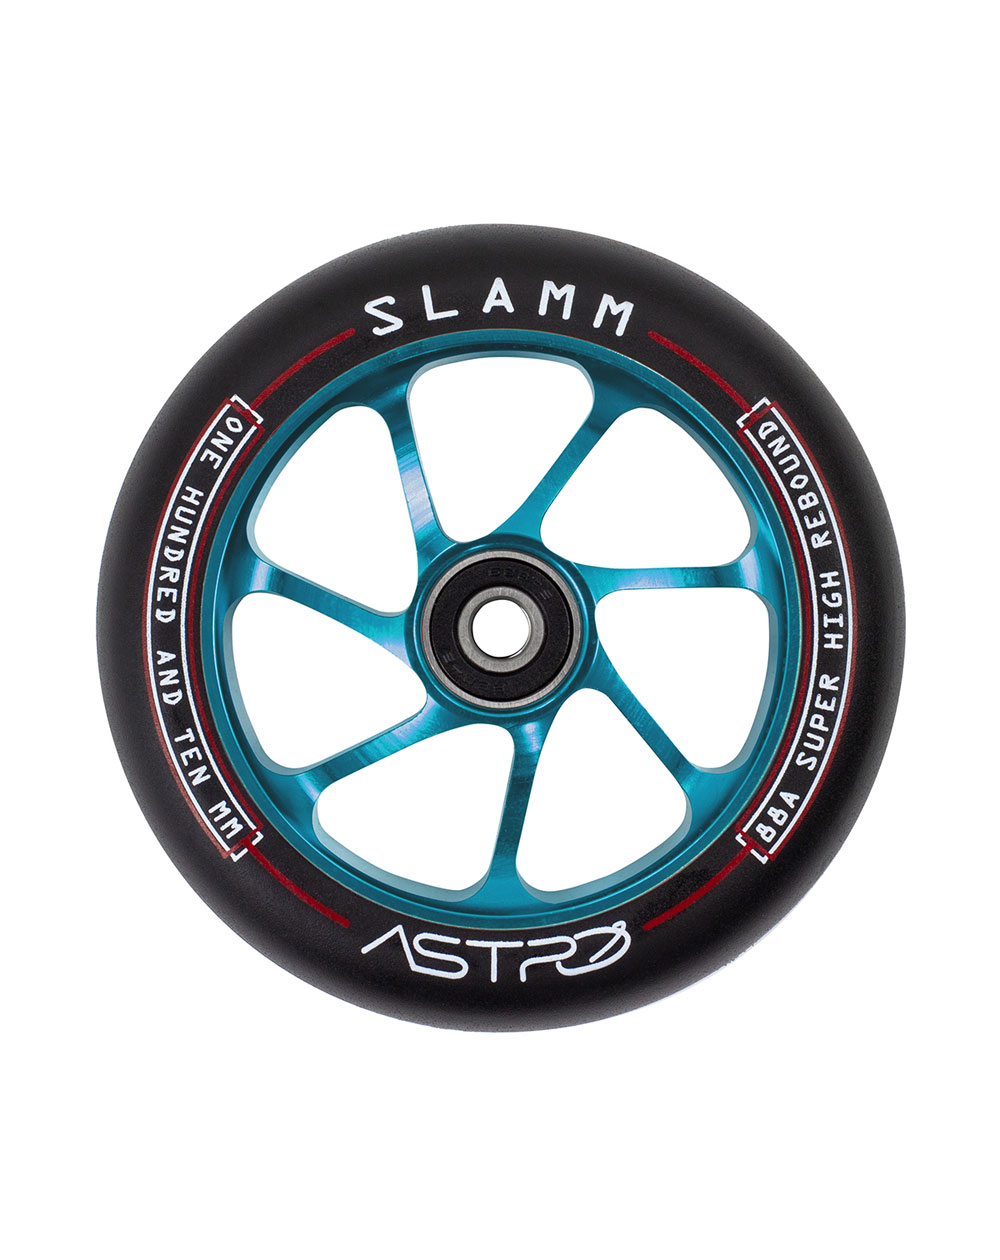 Slamm Scooters Astro 110mm Scooter Wheel Blue